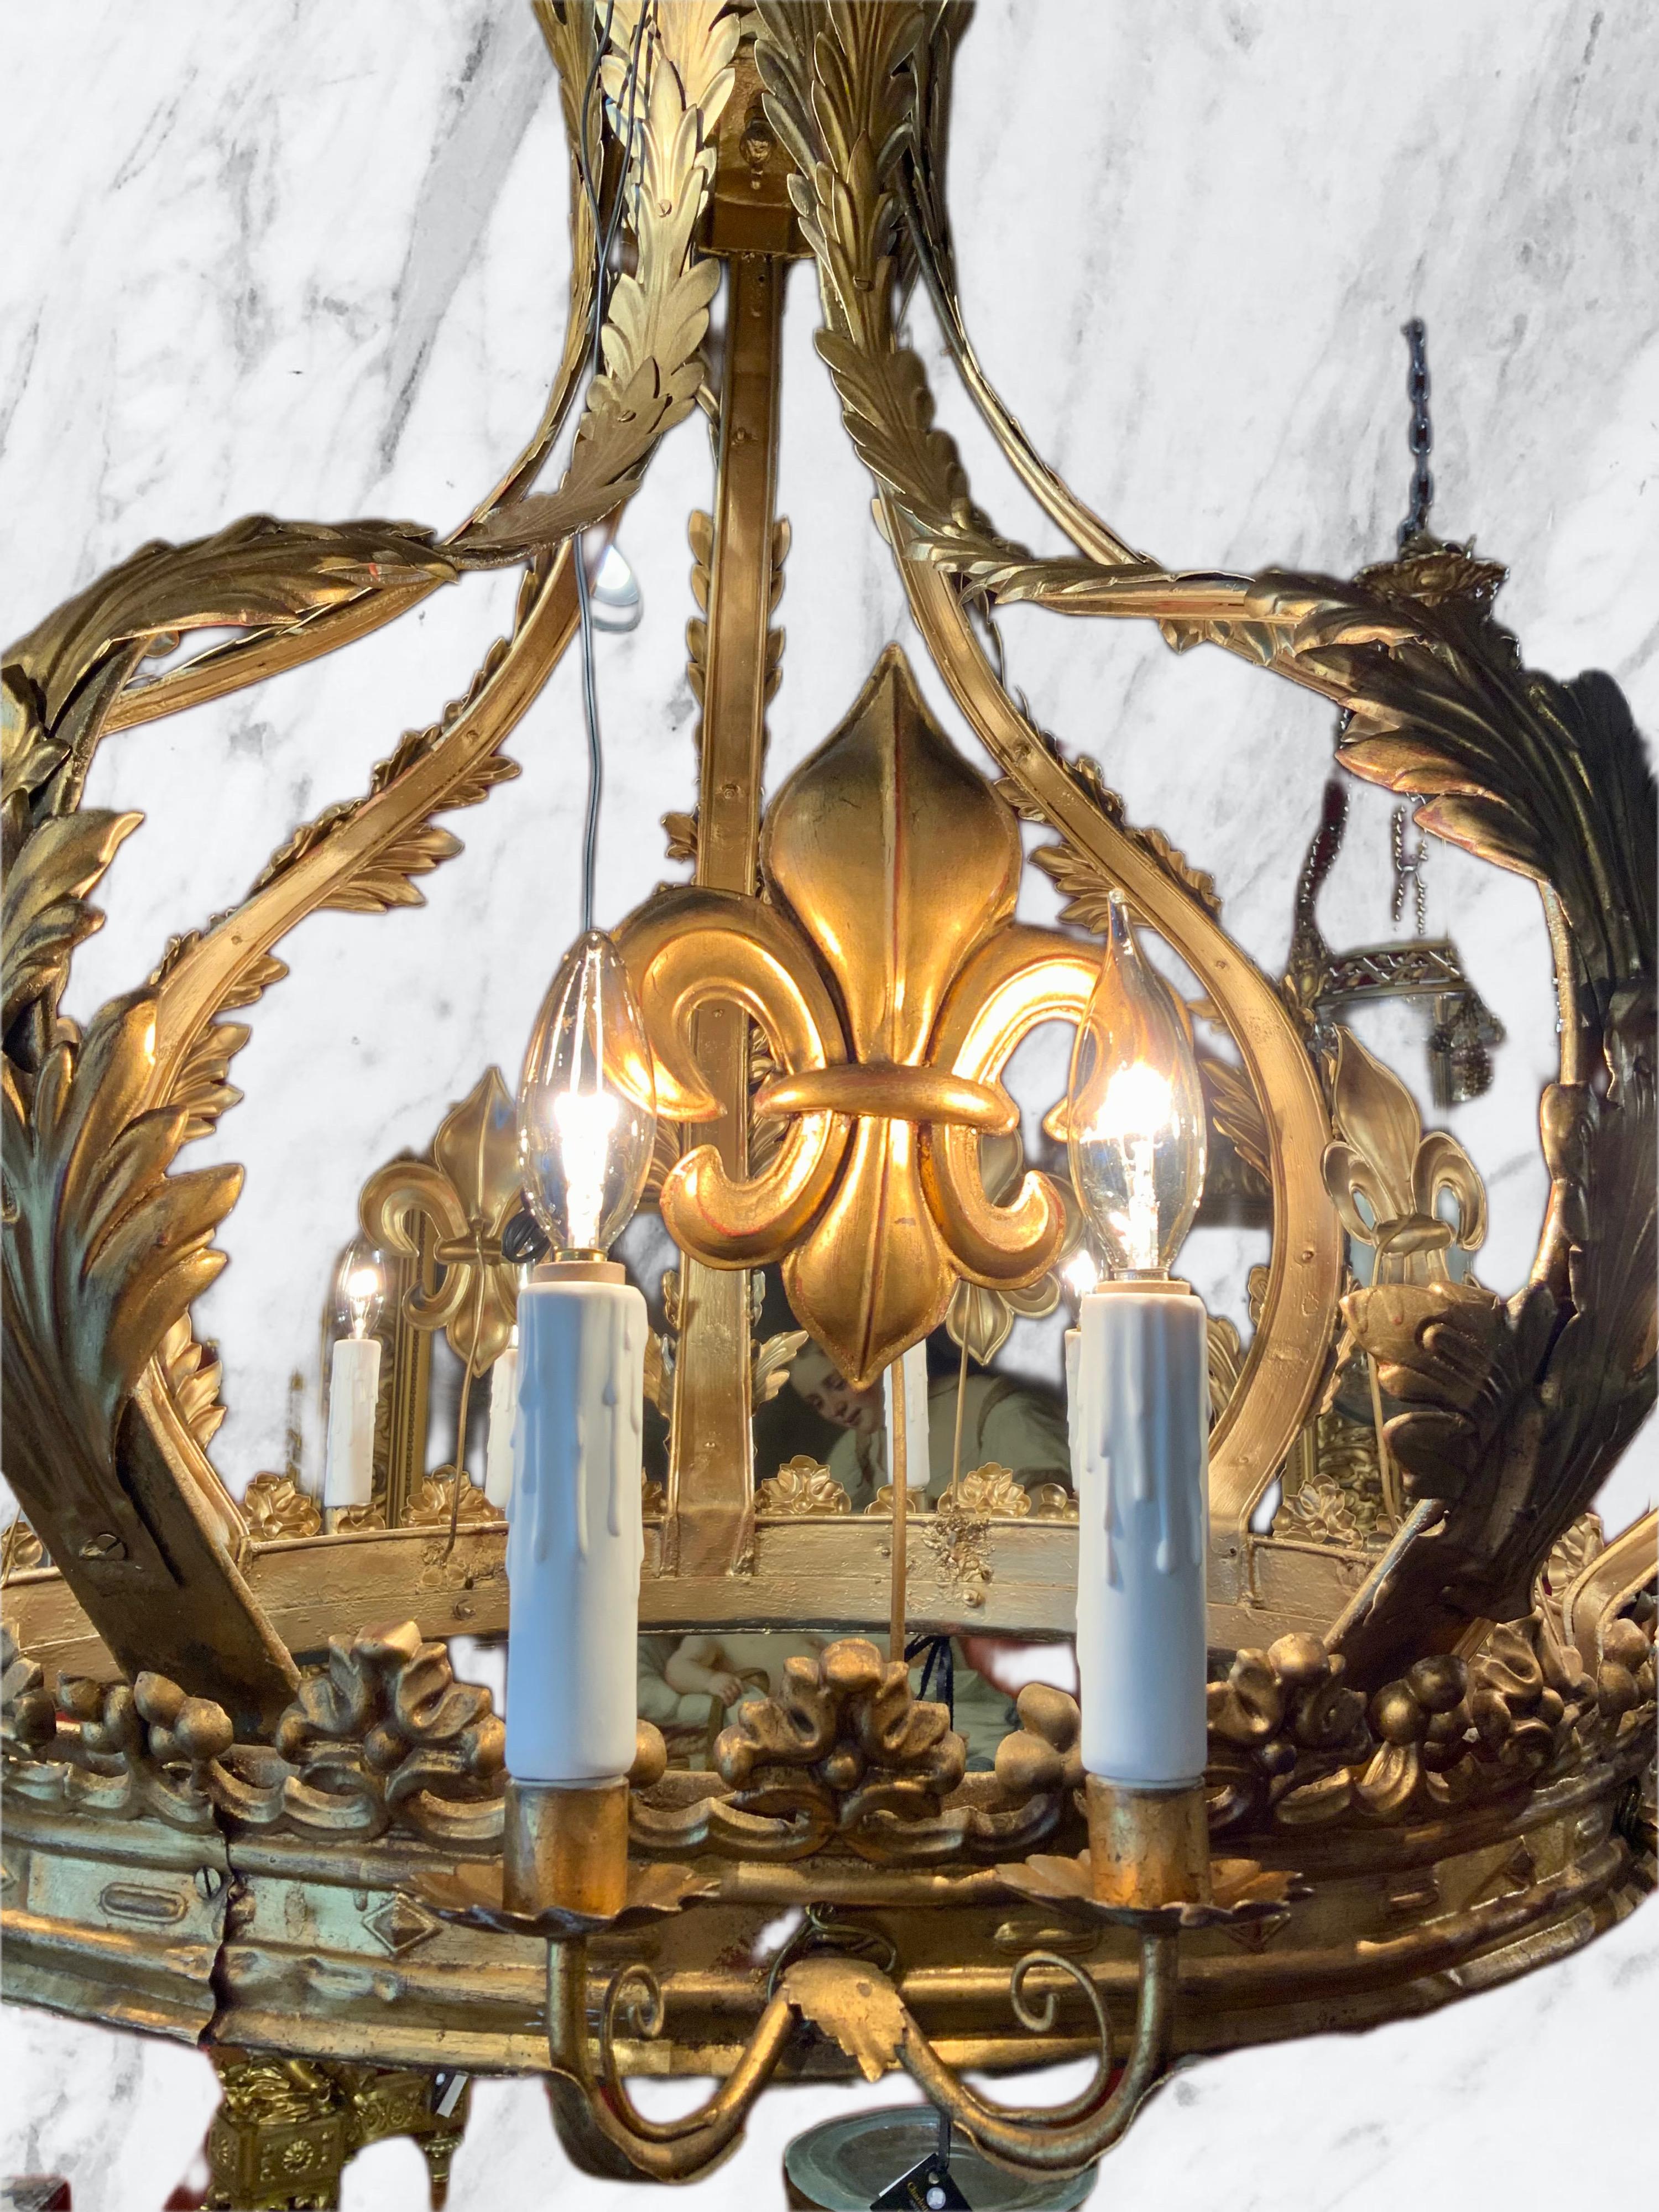 Unique design in a round crown like form is made in a gilt.
Metal. Twelve lights surround the outer ring of this exceptional. 
Chandelier. A design in the form of the fleur d lis design.
Is positioned between the candles. The shape of this